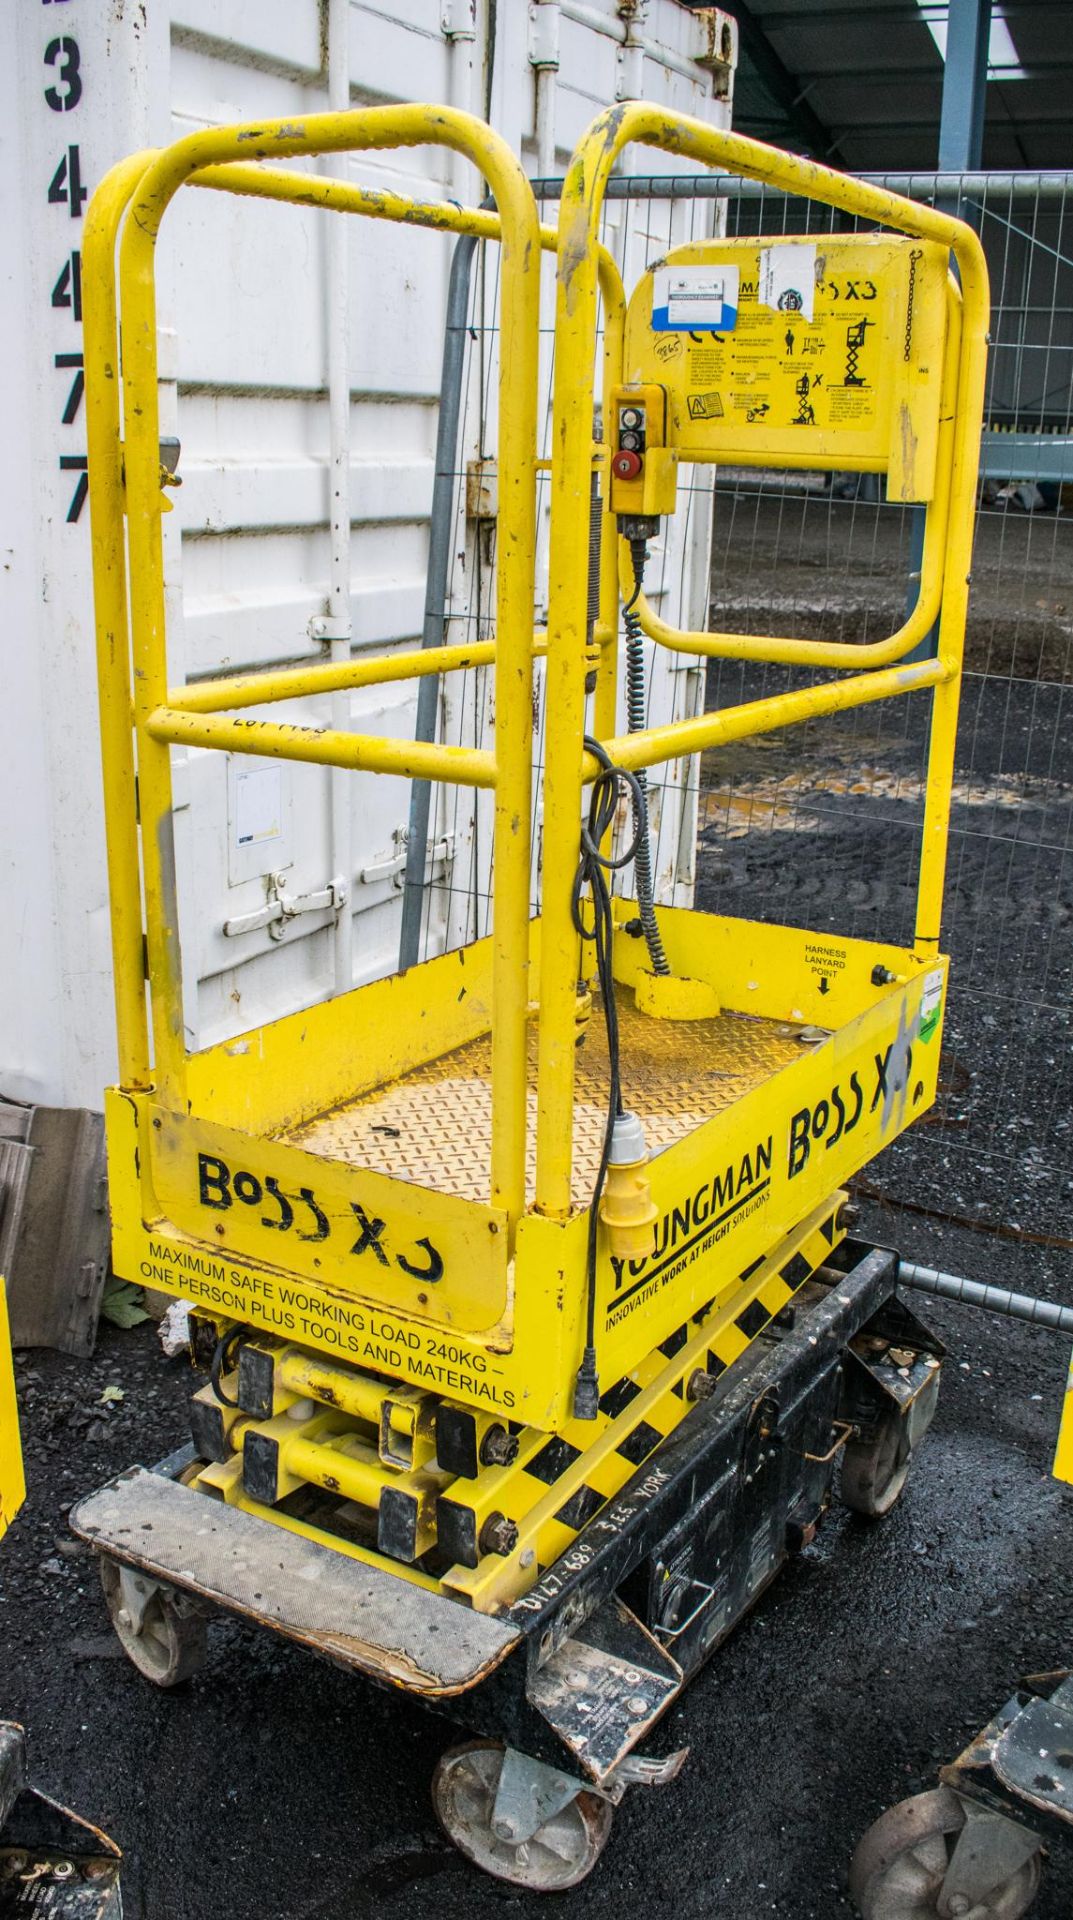 Boss X3 battery electric push around access platform Year: 2013 S/N: 11996 SESE0007538